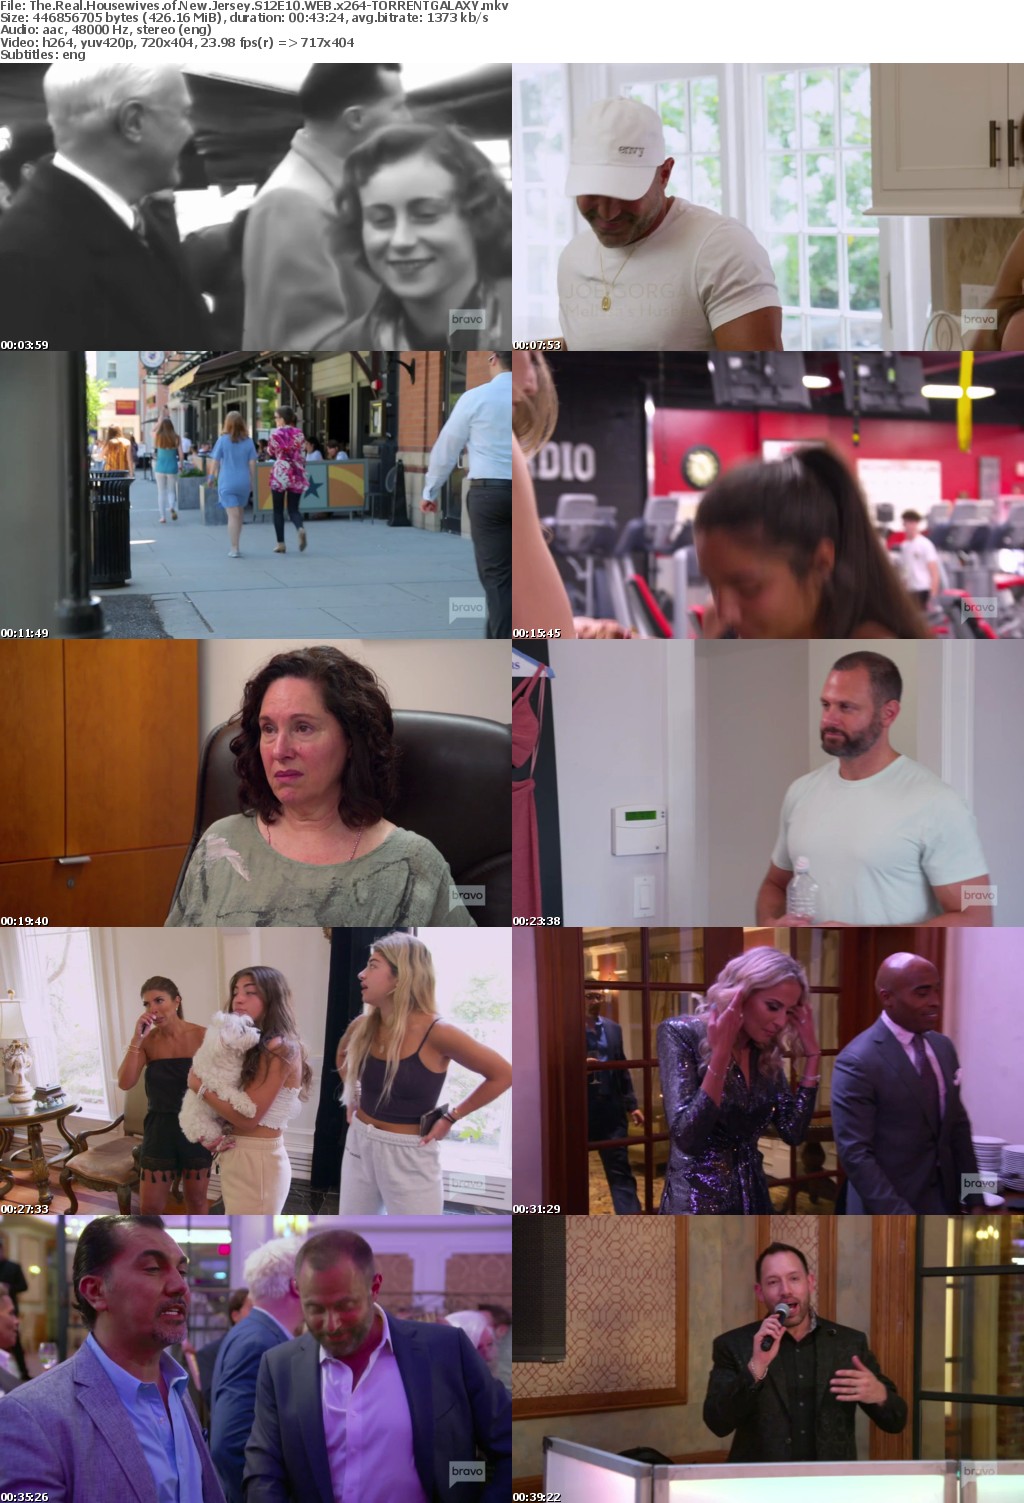 The Real Housewives of New Jersey S12E10 WEB x264-GALAXY